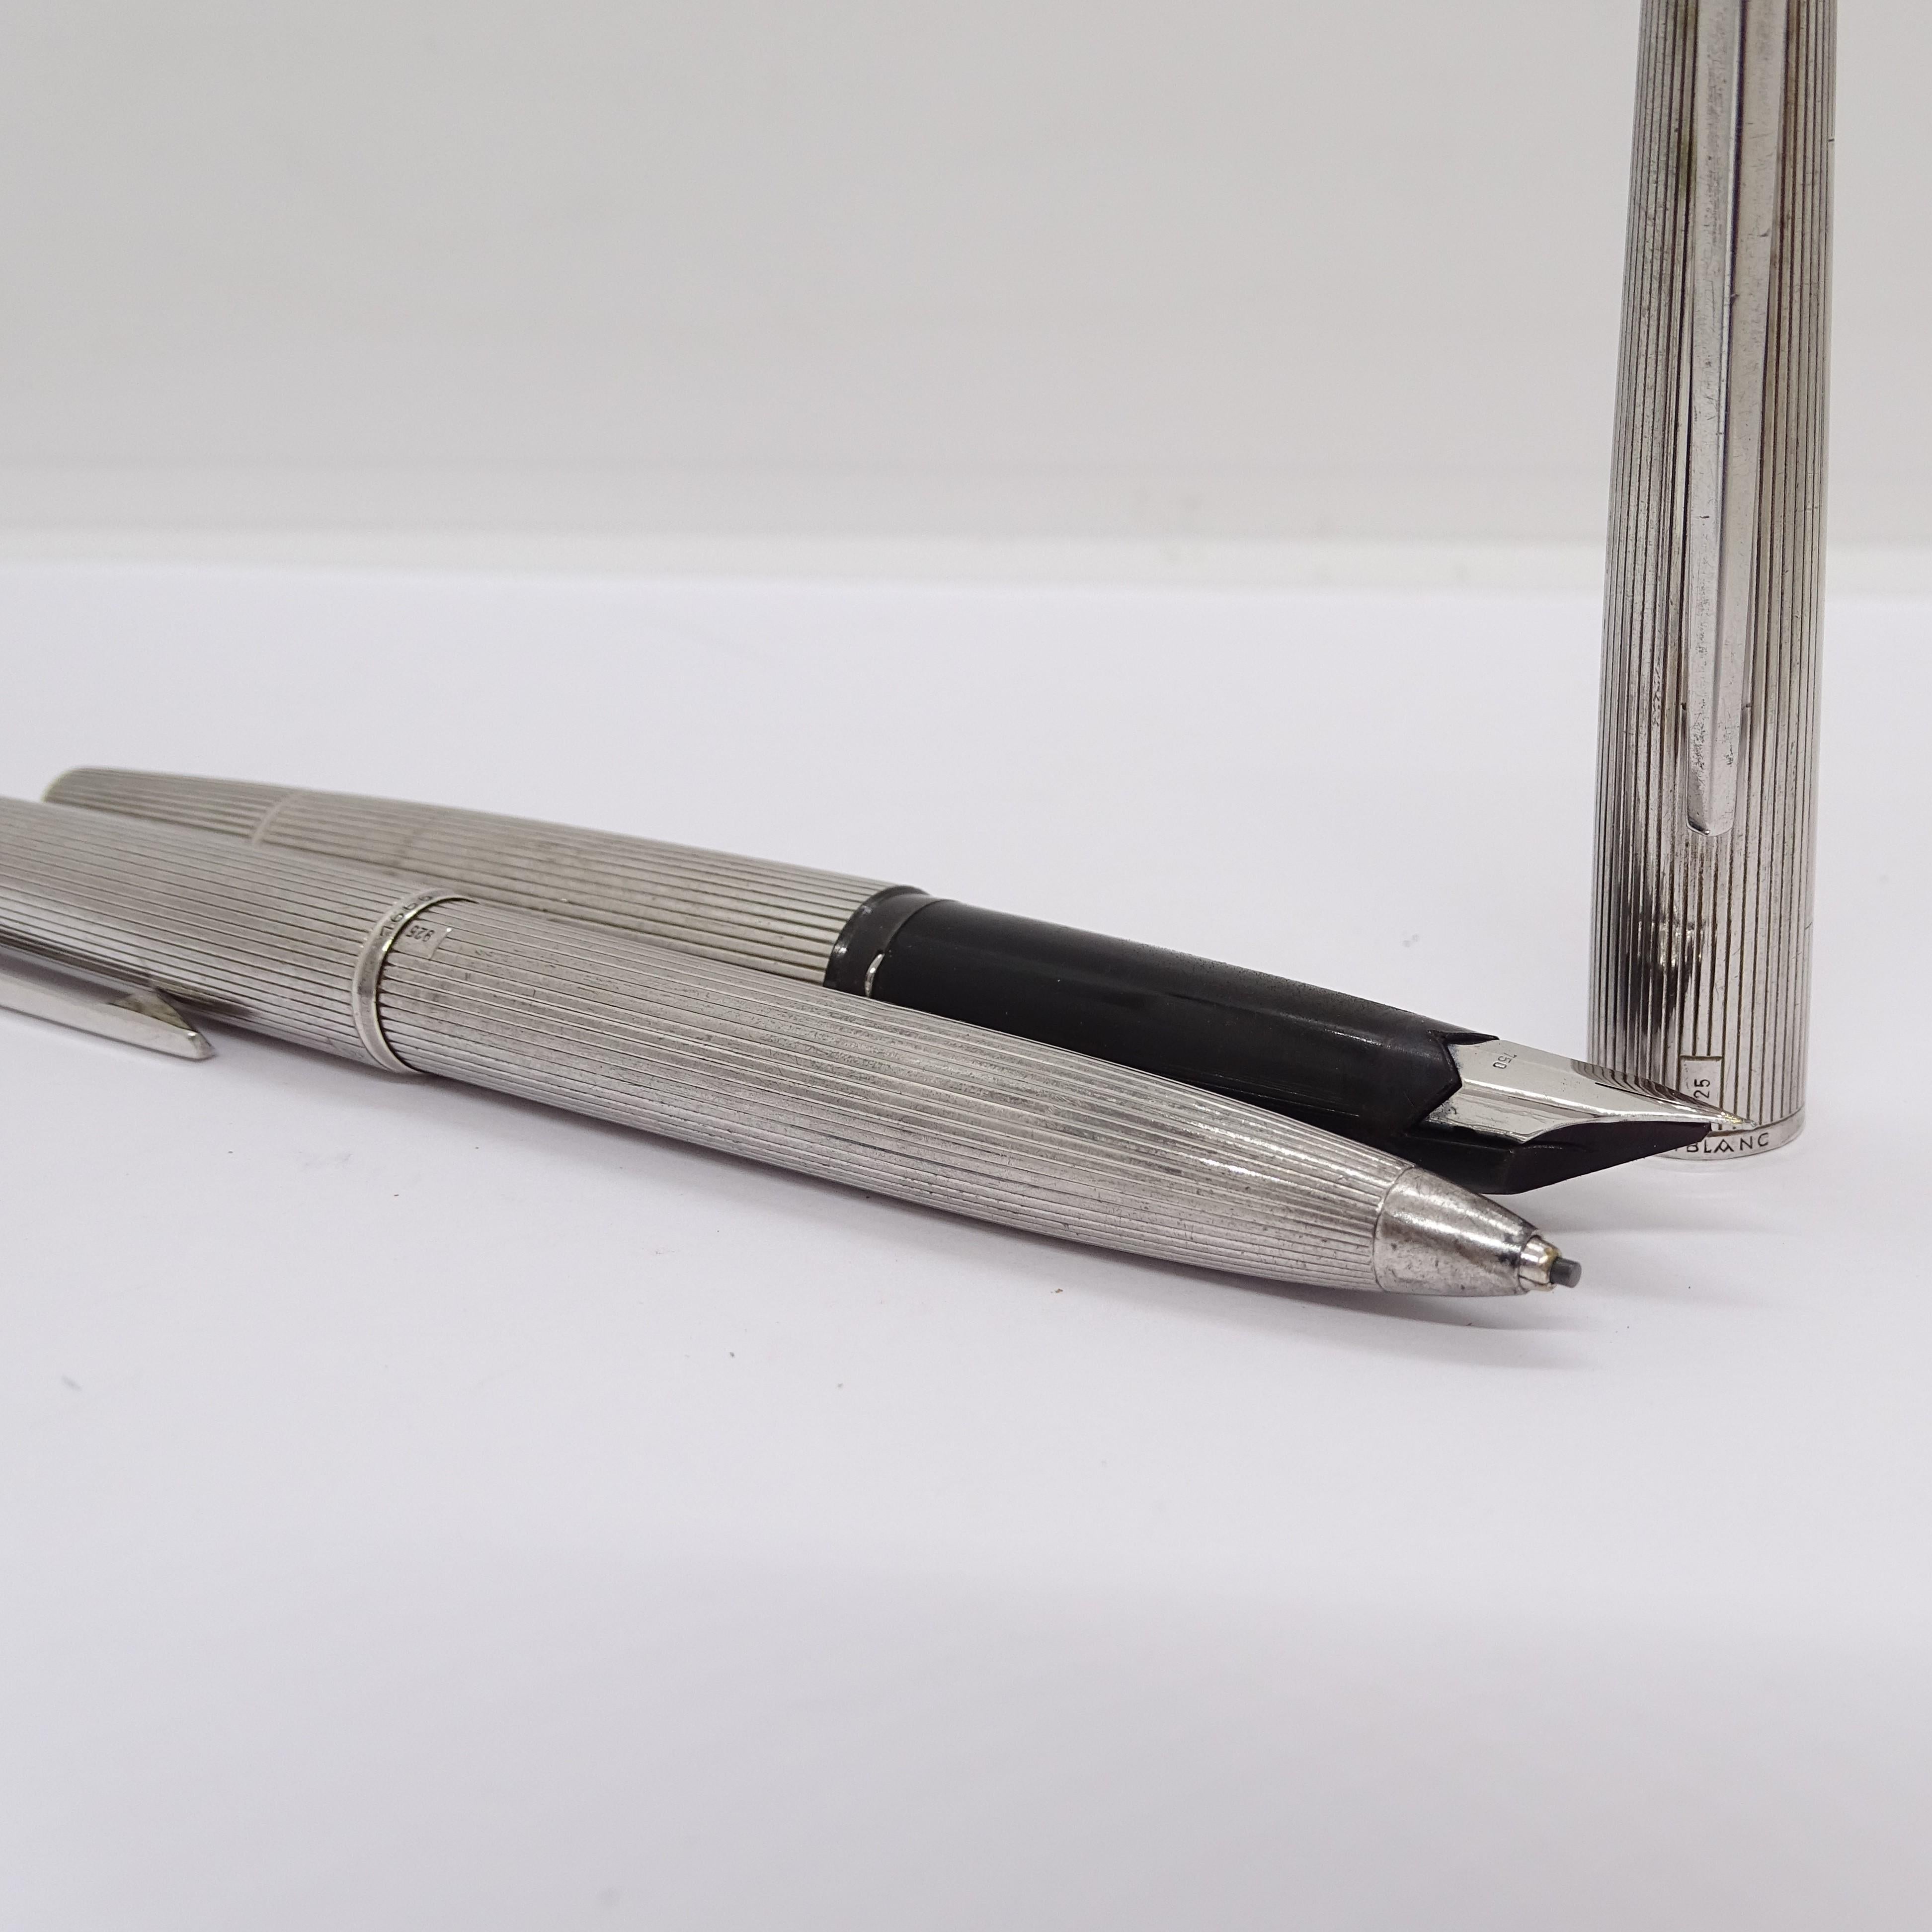 Montblanc writing set, 1266 pen and 1666 mechanical pencil, 925 silver, 80's 5